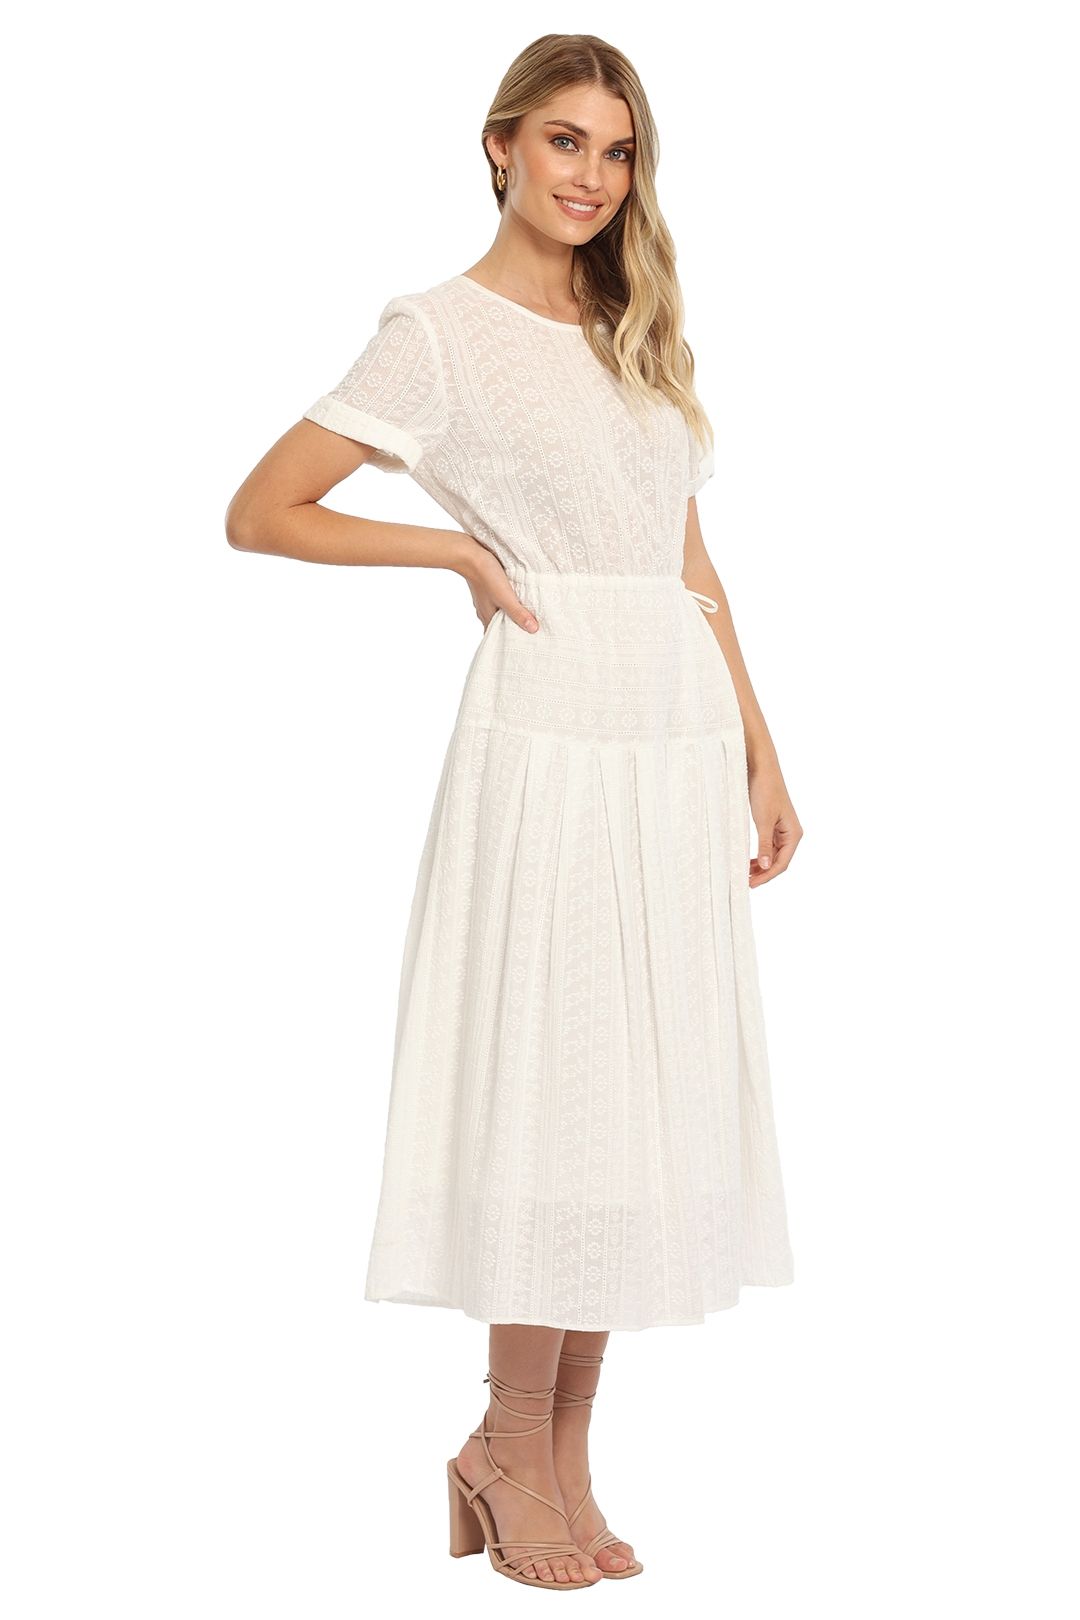 Kate Sylvester Broderie Midi Dress in White Embroidery 